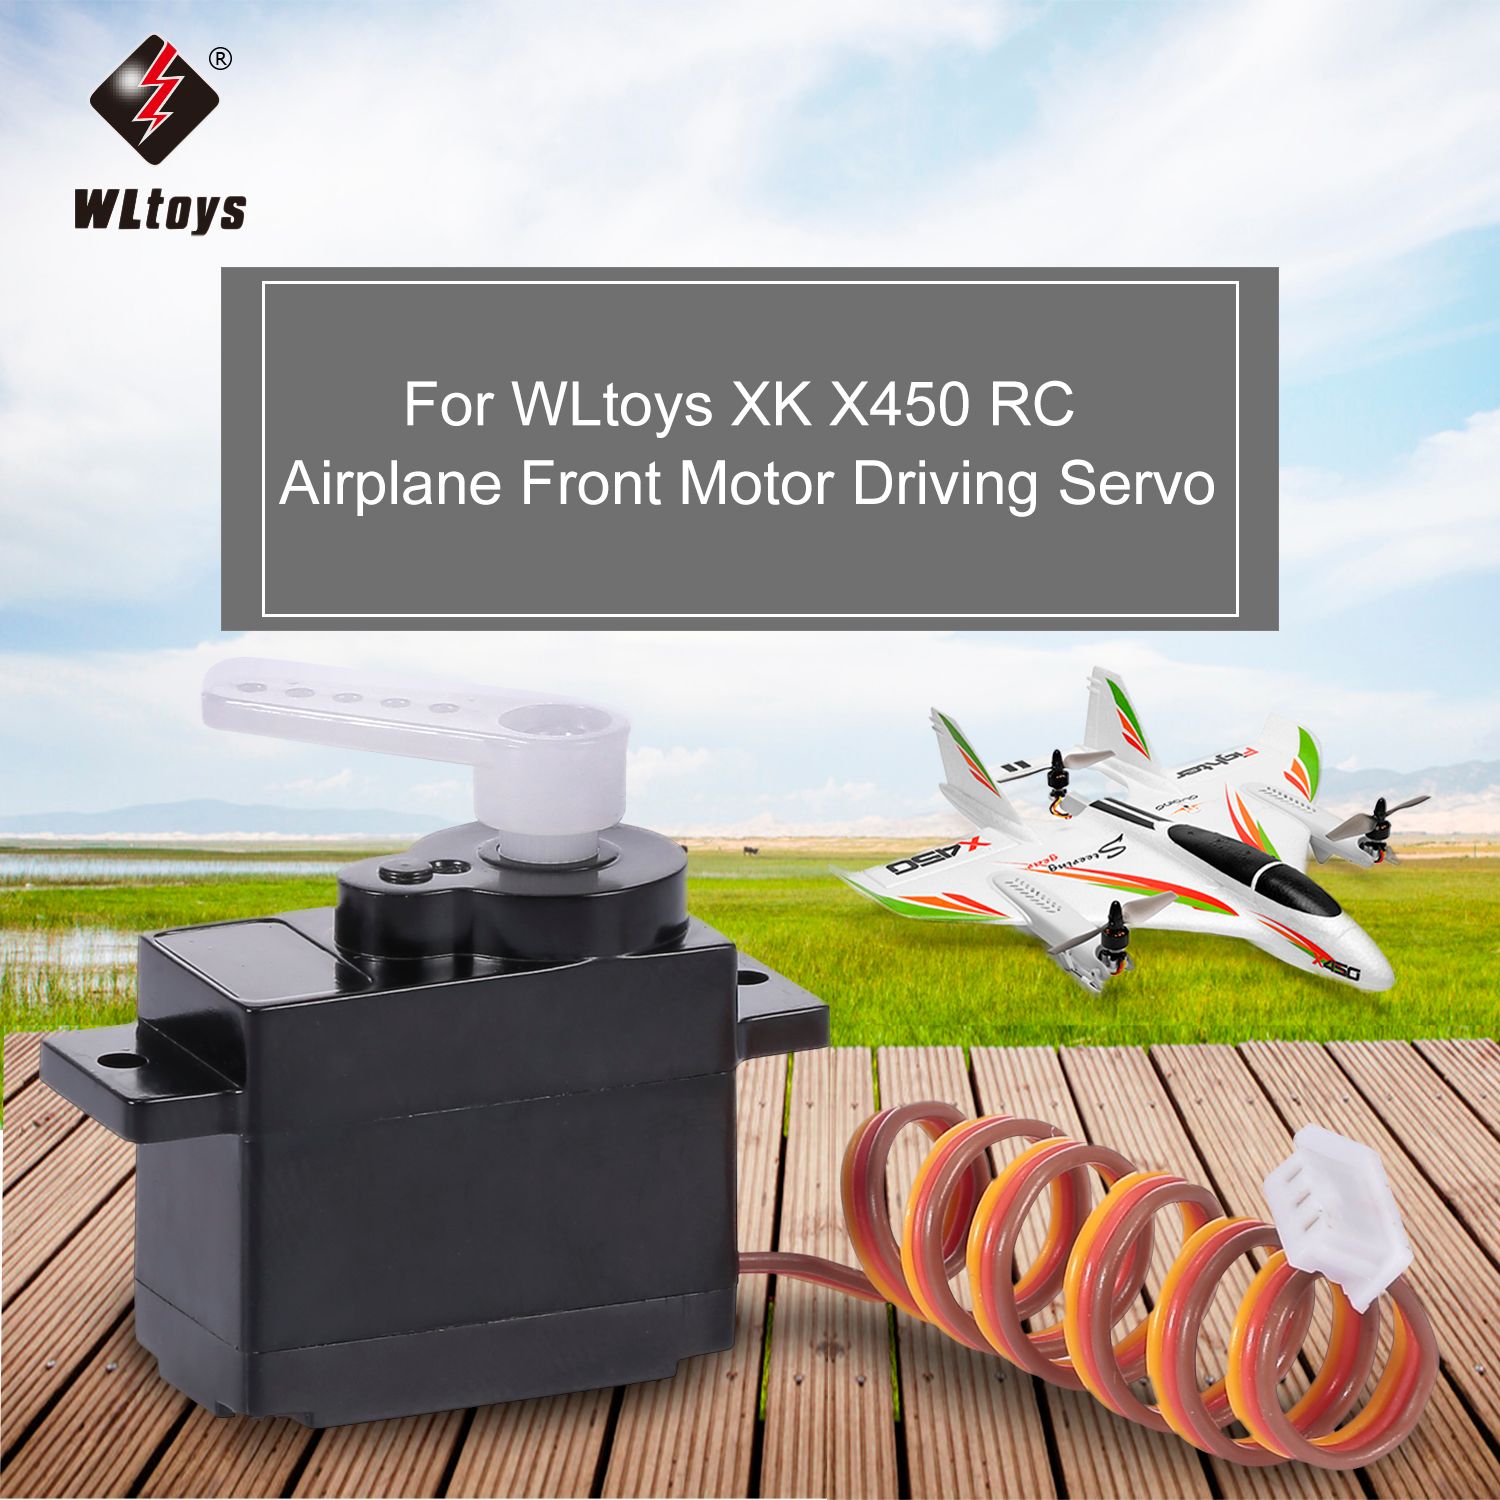 WLtoys XK X450 RC Airplane Aircraft Helicopter Fixed Wing - Front